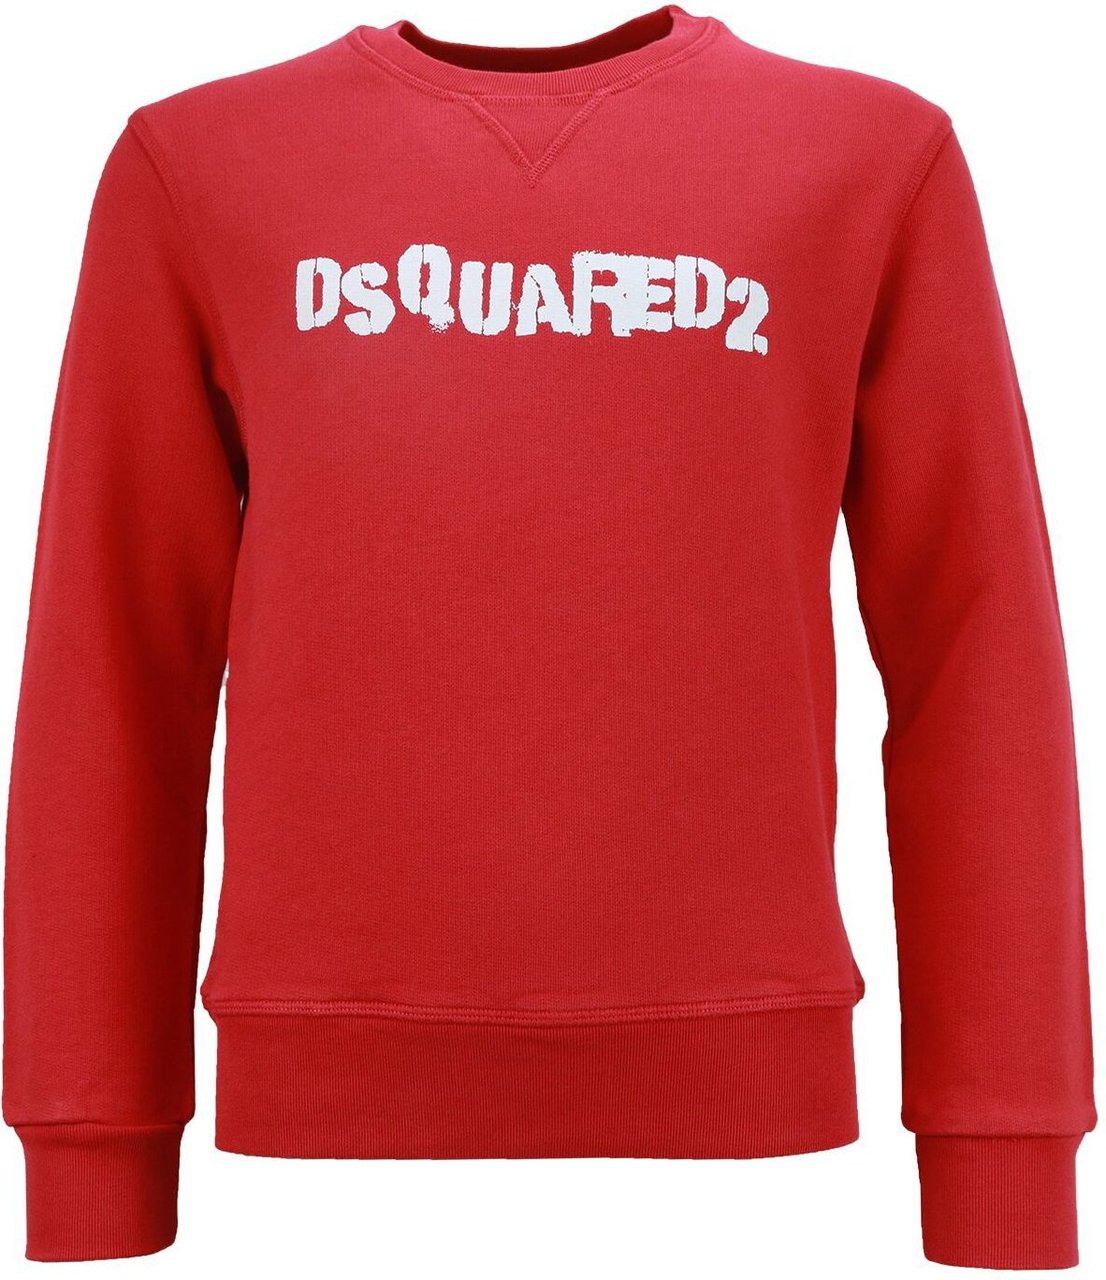 Dsquared2 Sweater Slimfit Rood Logo Wit Rood